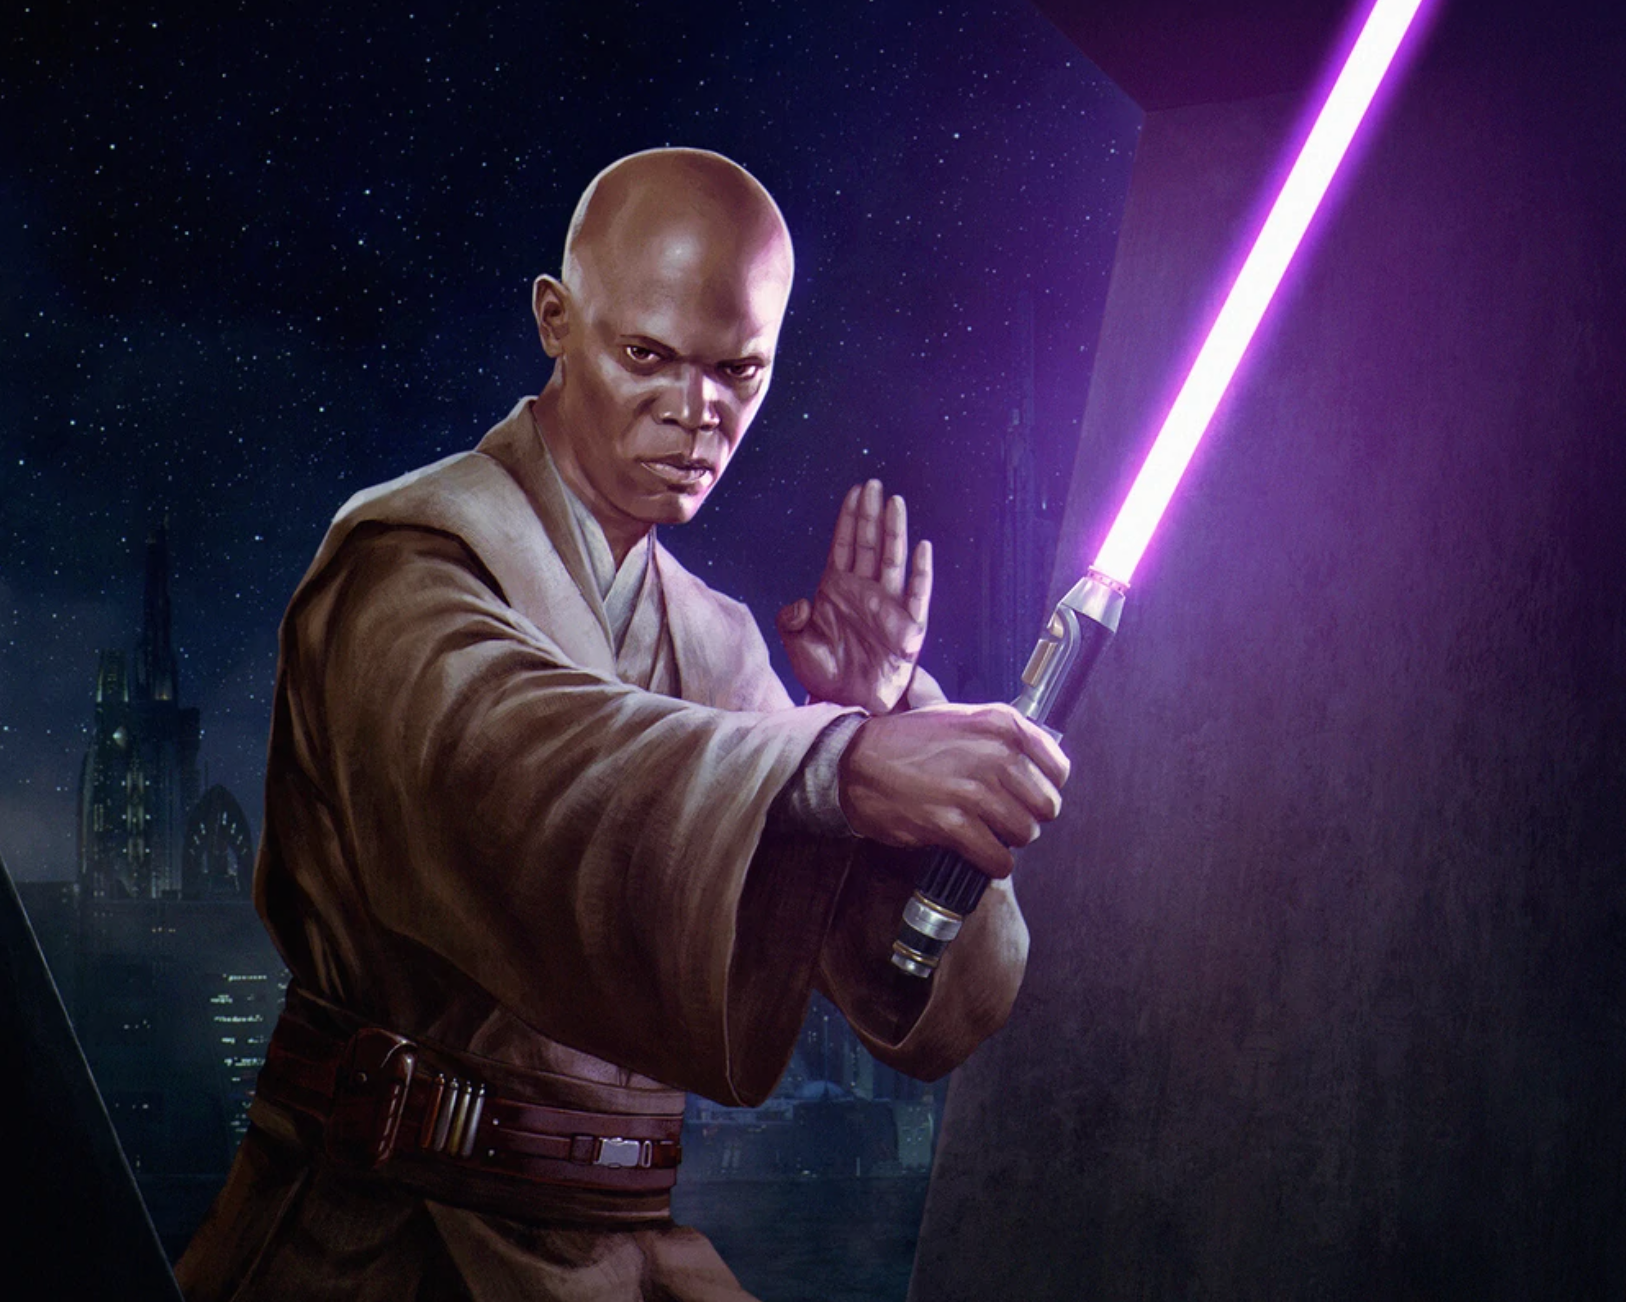 What Does the Purple Lightsaber in Star Wars Mean?